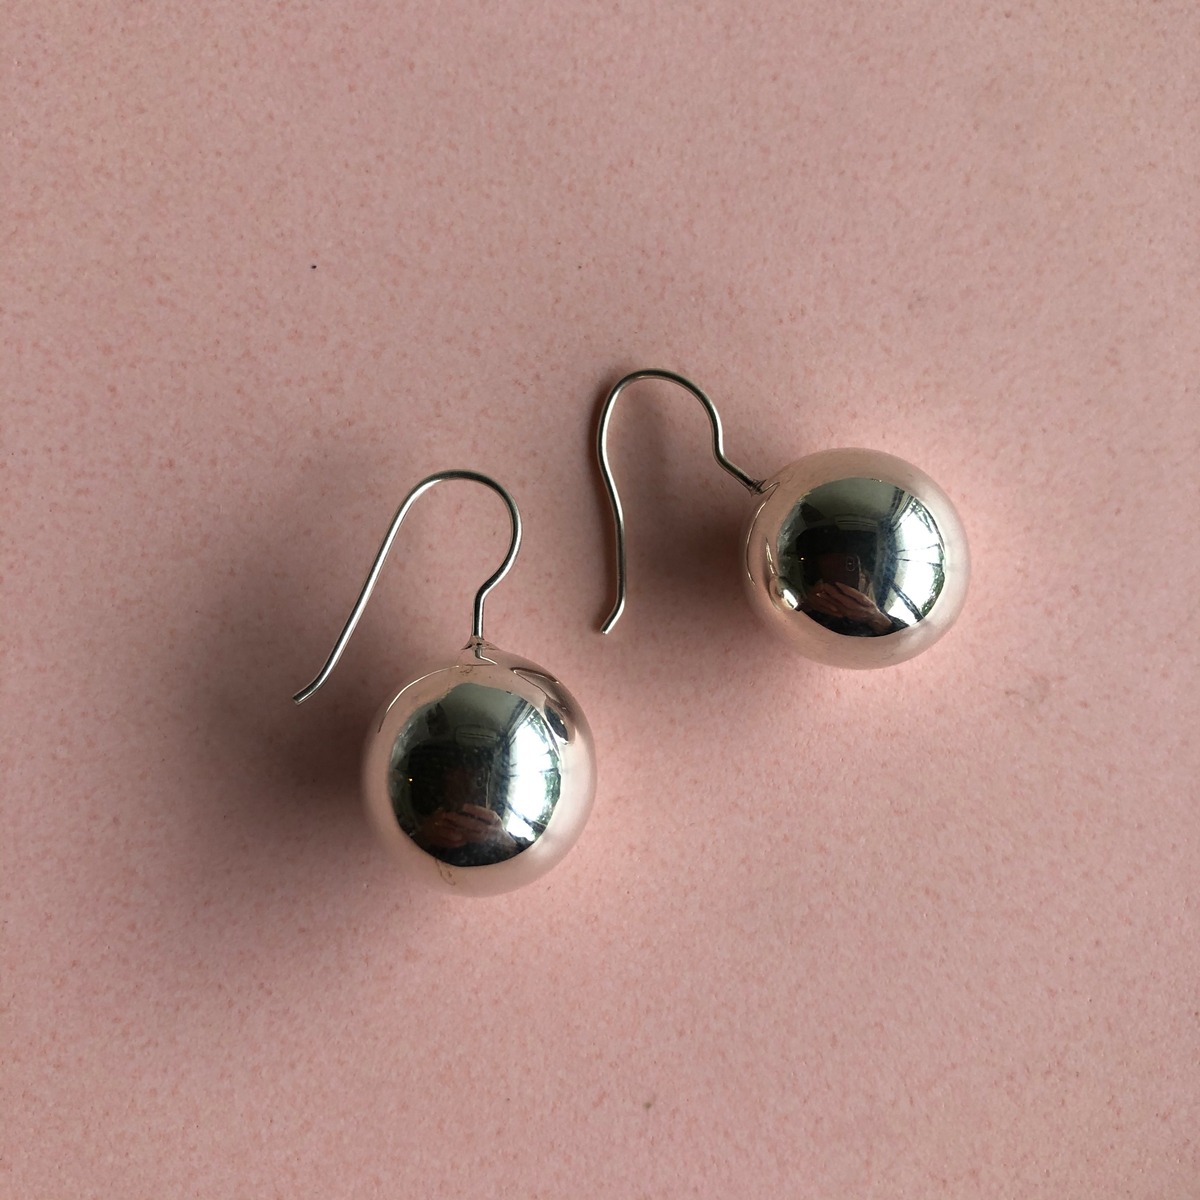 16mm Silver ball earrings from Mexico | BASENOTES